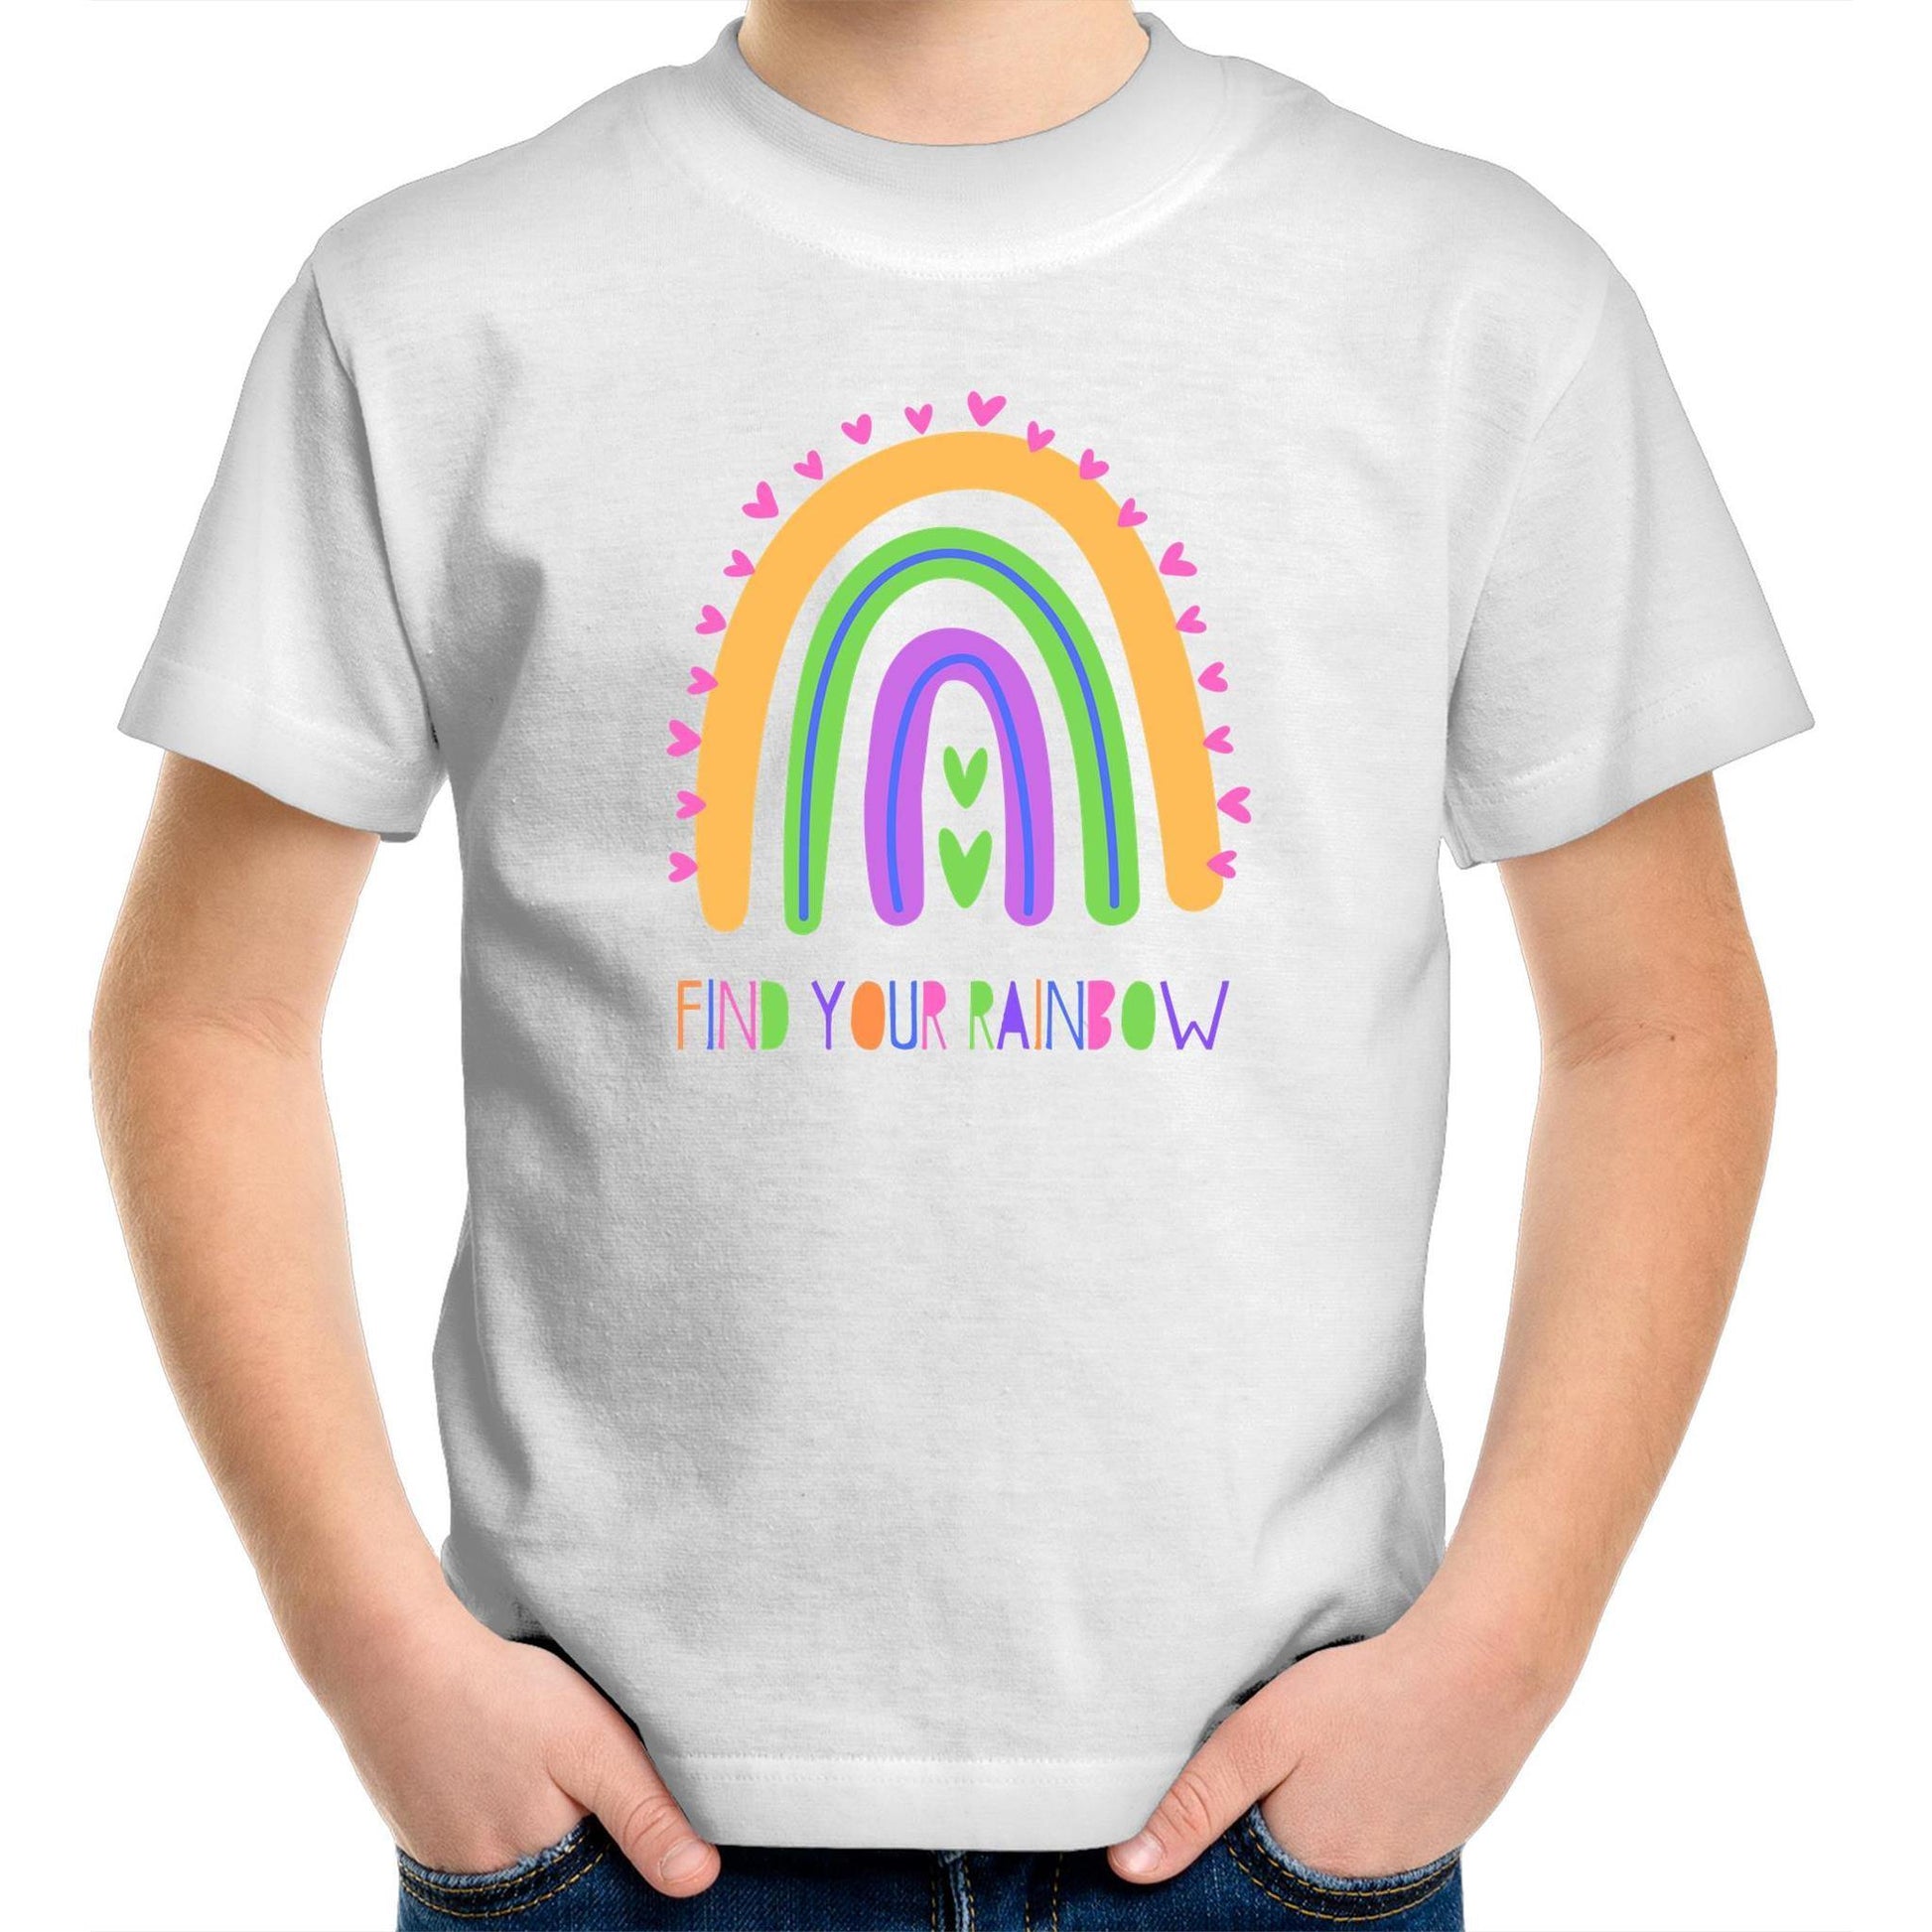 Find Your Rainbow - Kids Youth Crew T-Shirt White Kids Youth T-shirt